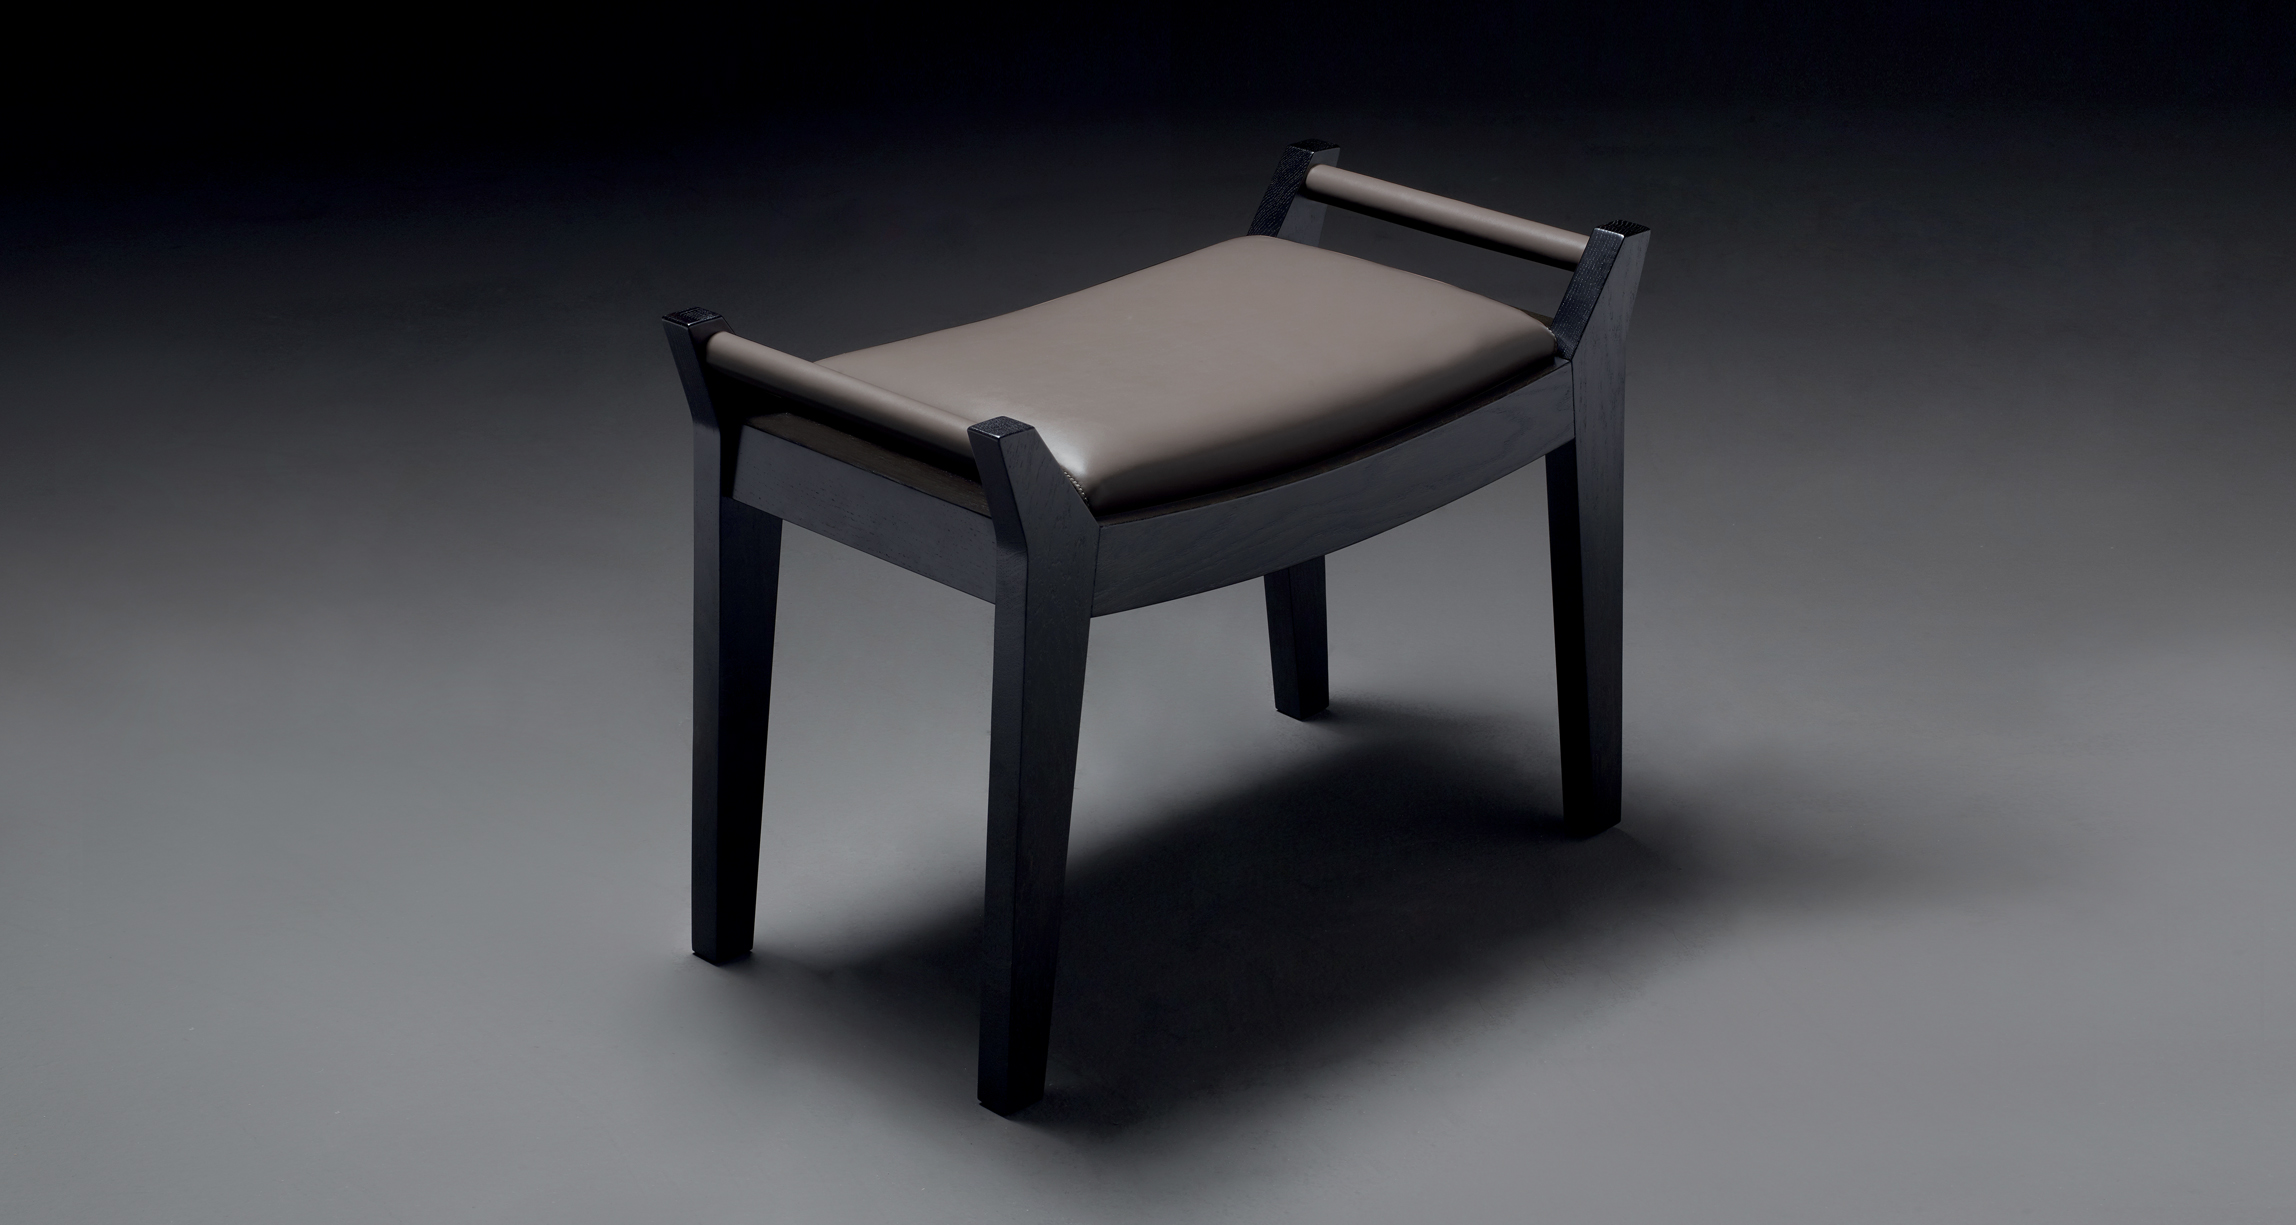 Jean is a wooden stool, leather seat from Promemoria's Amaranthine Tales collection | Promemoria